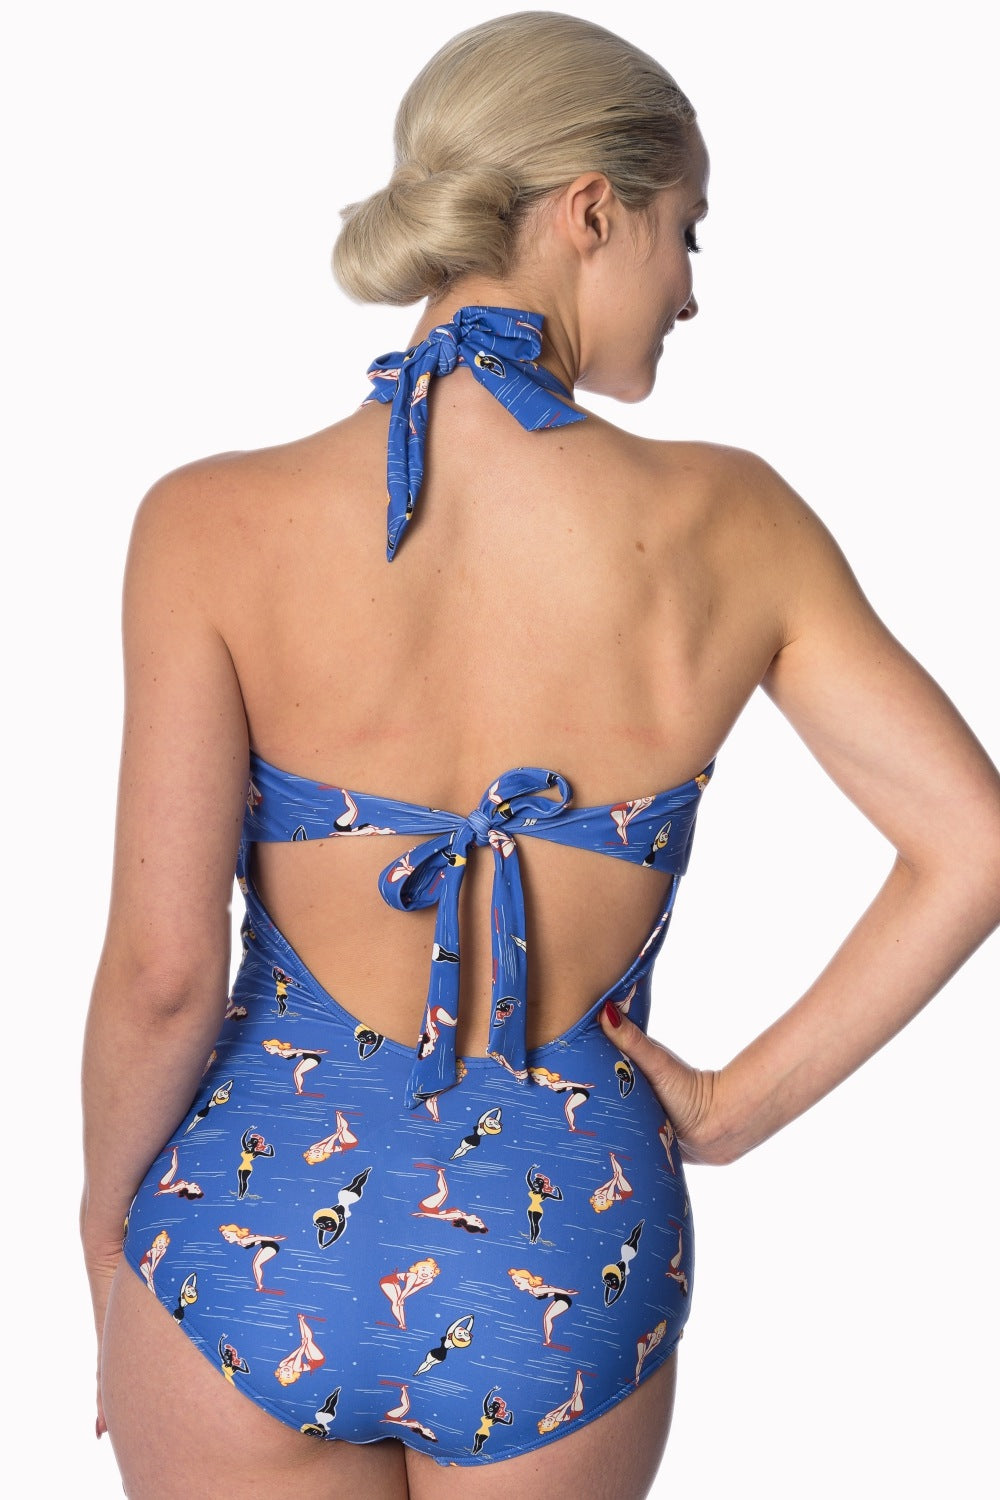 Woman standing with one hand on her hip facing away from the camera  wearing a blue halter neck swimming costume with an all over print of pinup girl cartoon swimmers